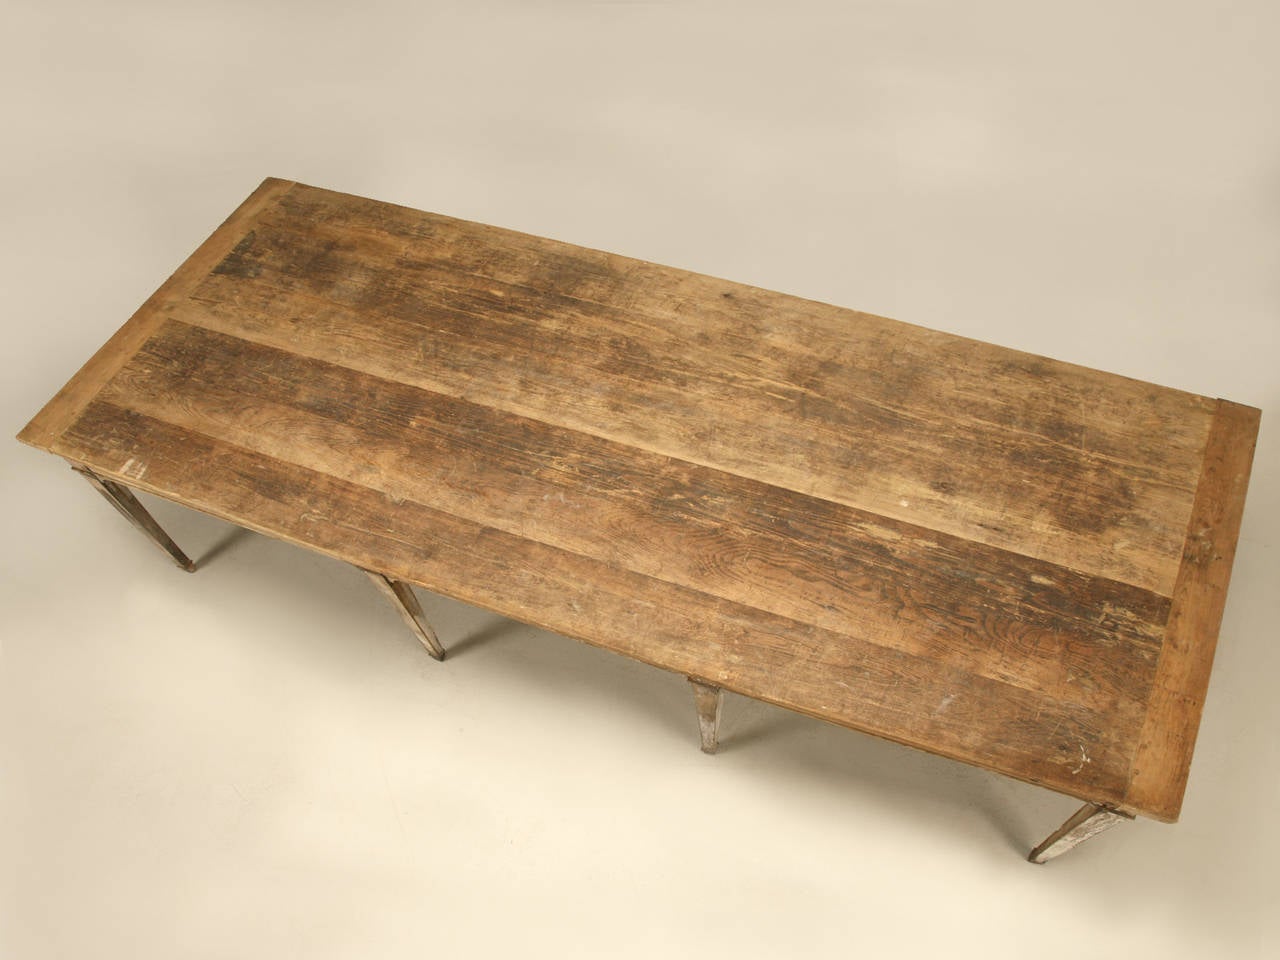 Generally when I see old farm tables this wide, I immediately think they were just assembled from a stack of old reclaimed lumber, but the more I looked the table over from the underside, I quickly determined that it was in fact an antique. Although